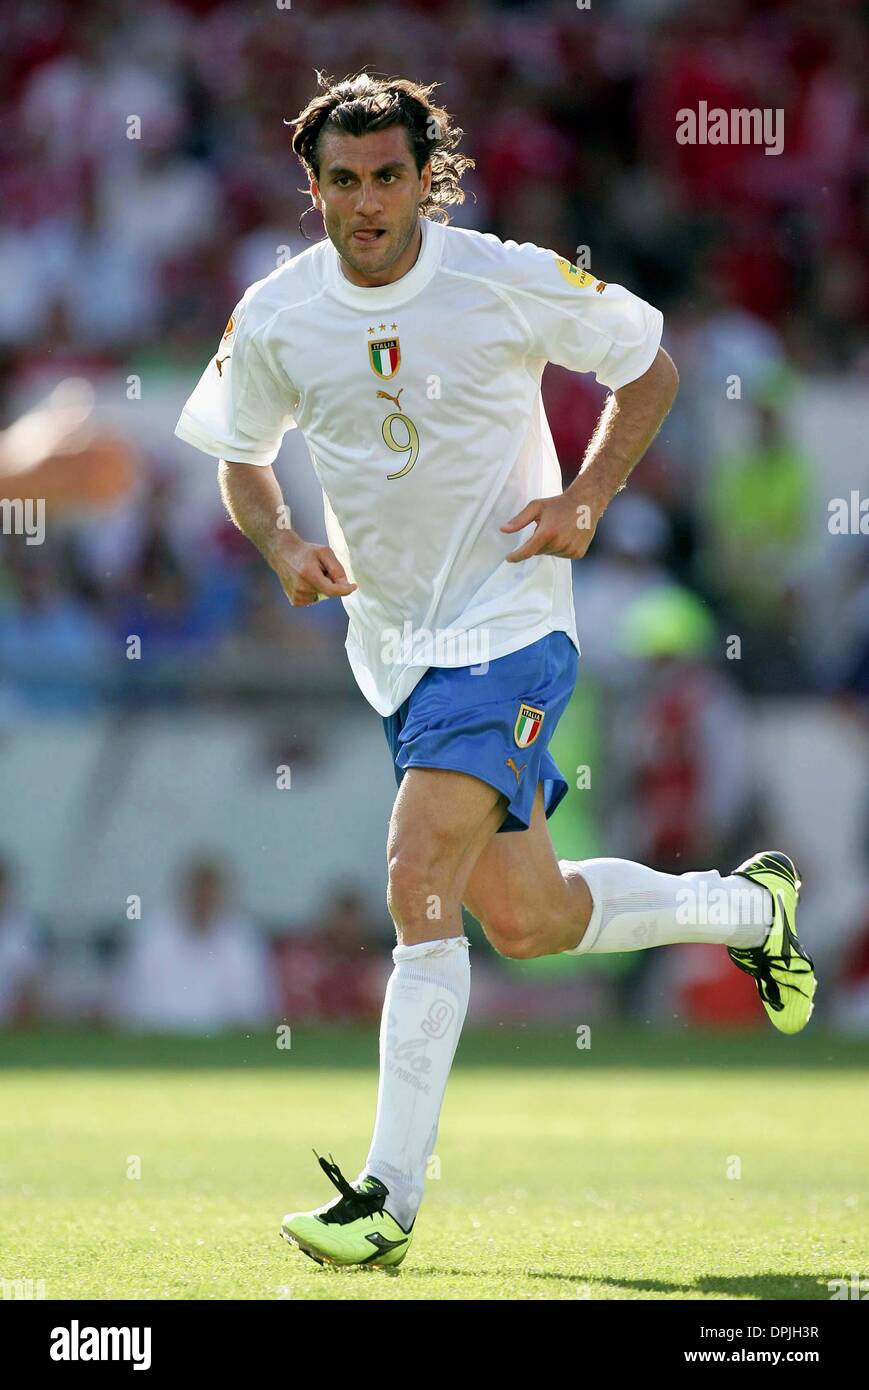 CHRISTIAN VIERI.ITALY & FC INTERNAZIONALE.ITALY V DENMARK EURO 2004.D.  AFONSO HENRIQUES STADIUM, GUIMARAES,  PORTUGAL.16/06/2004.DIF23899.K47872.WORLD CUP PREVIEW 2006 Stock Photo -  Alamy